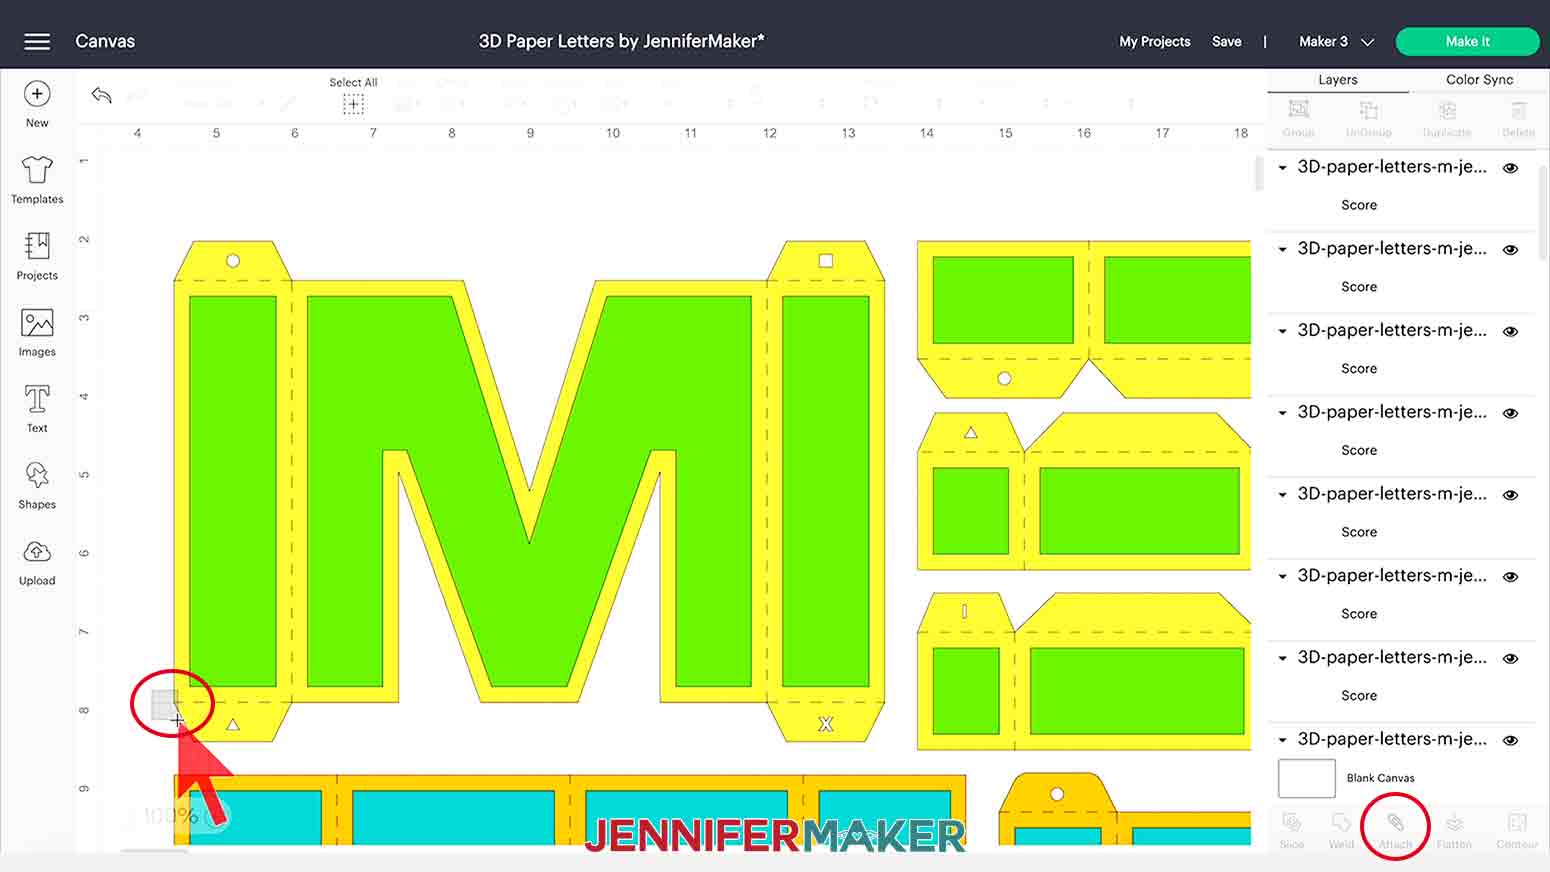 Screenshot demonstrating selecting just the yellow and score layer for the 3D Paper Letters project